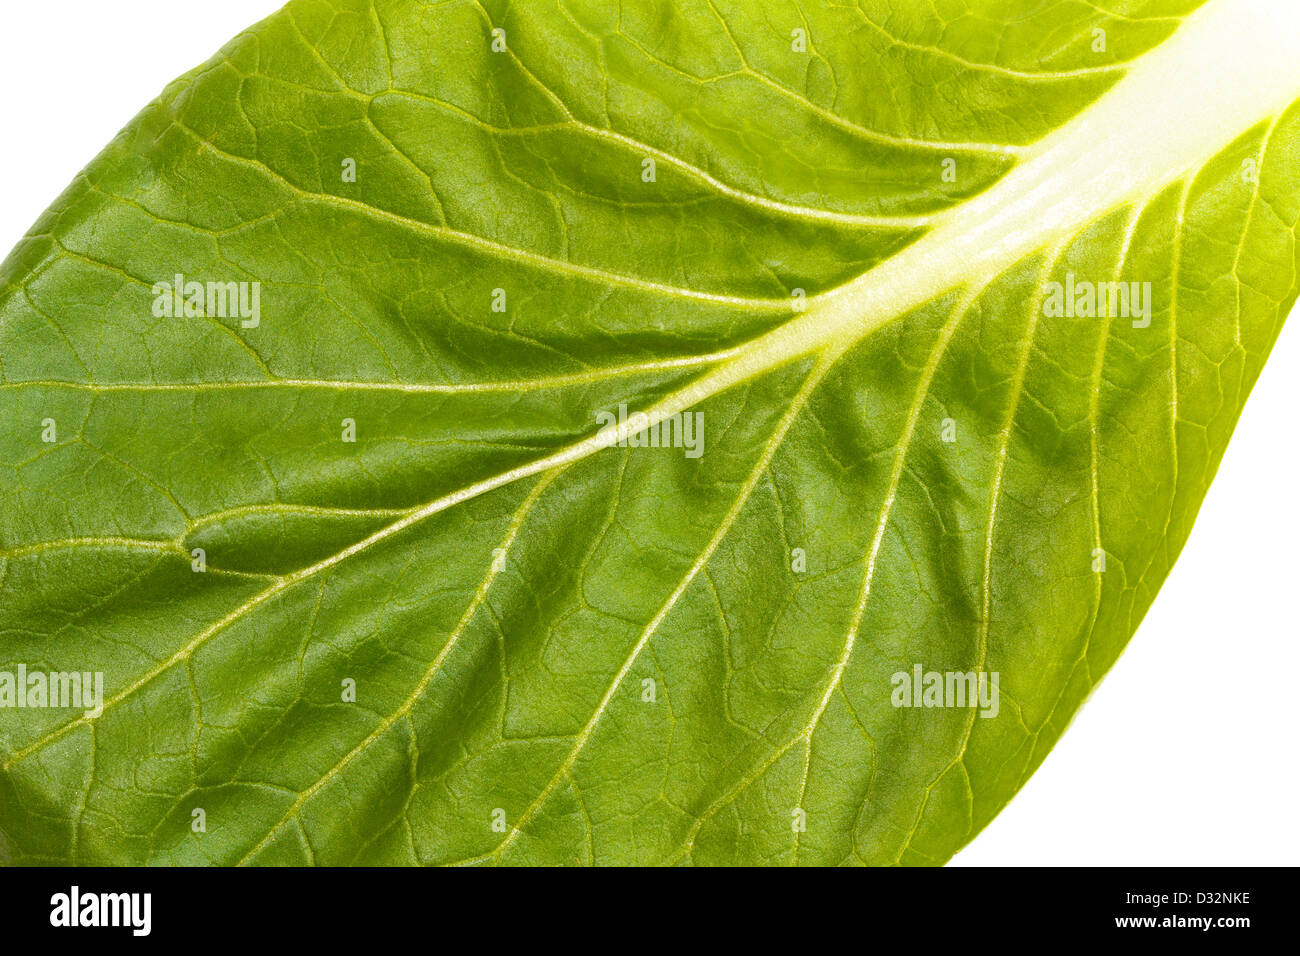 Close up of fresh green pak choi (Brassica rapa) leaf with veins Stock Photo